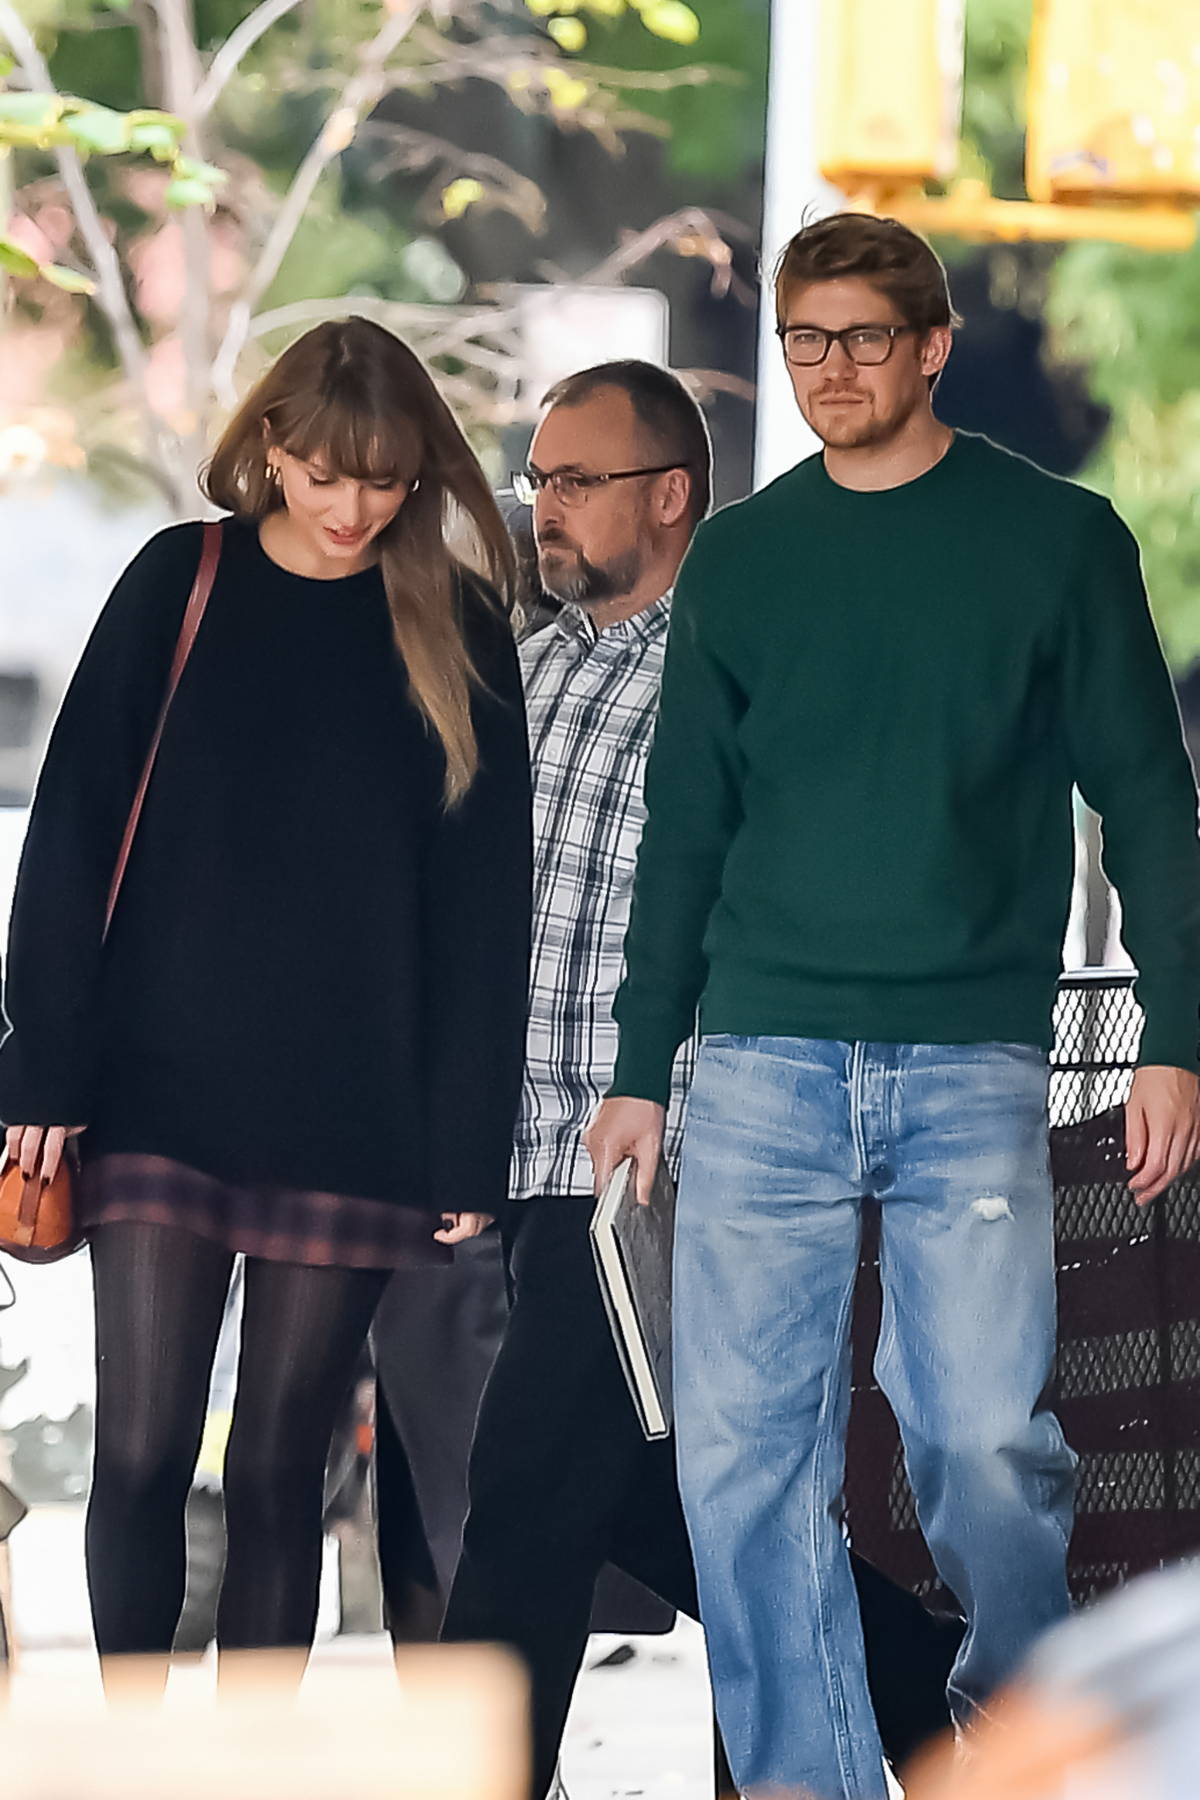 Taylor Swift steps out for some furniture shopping with boyfriend Joe Alwyn in New York City